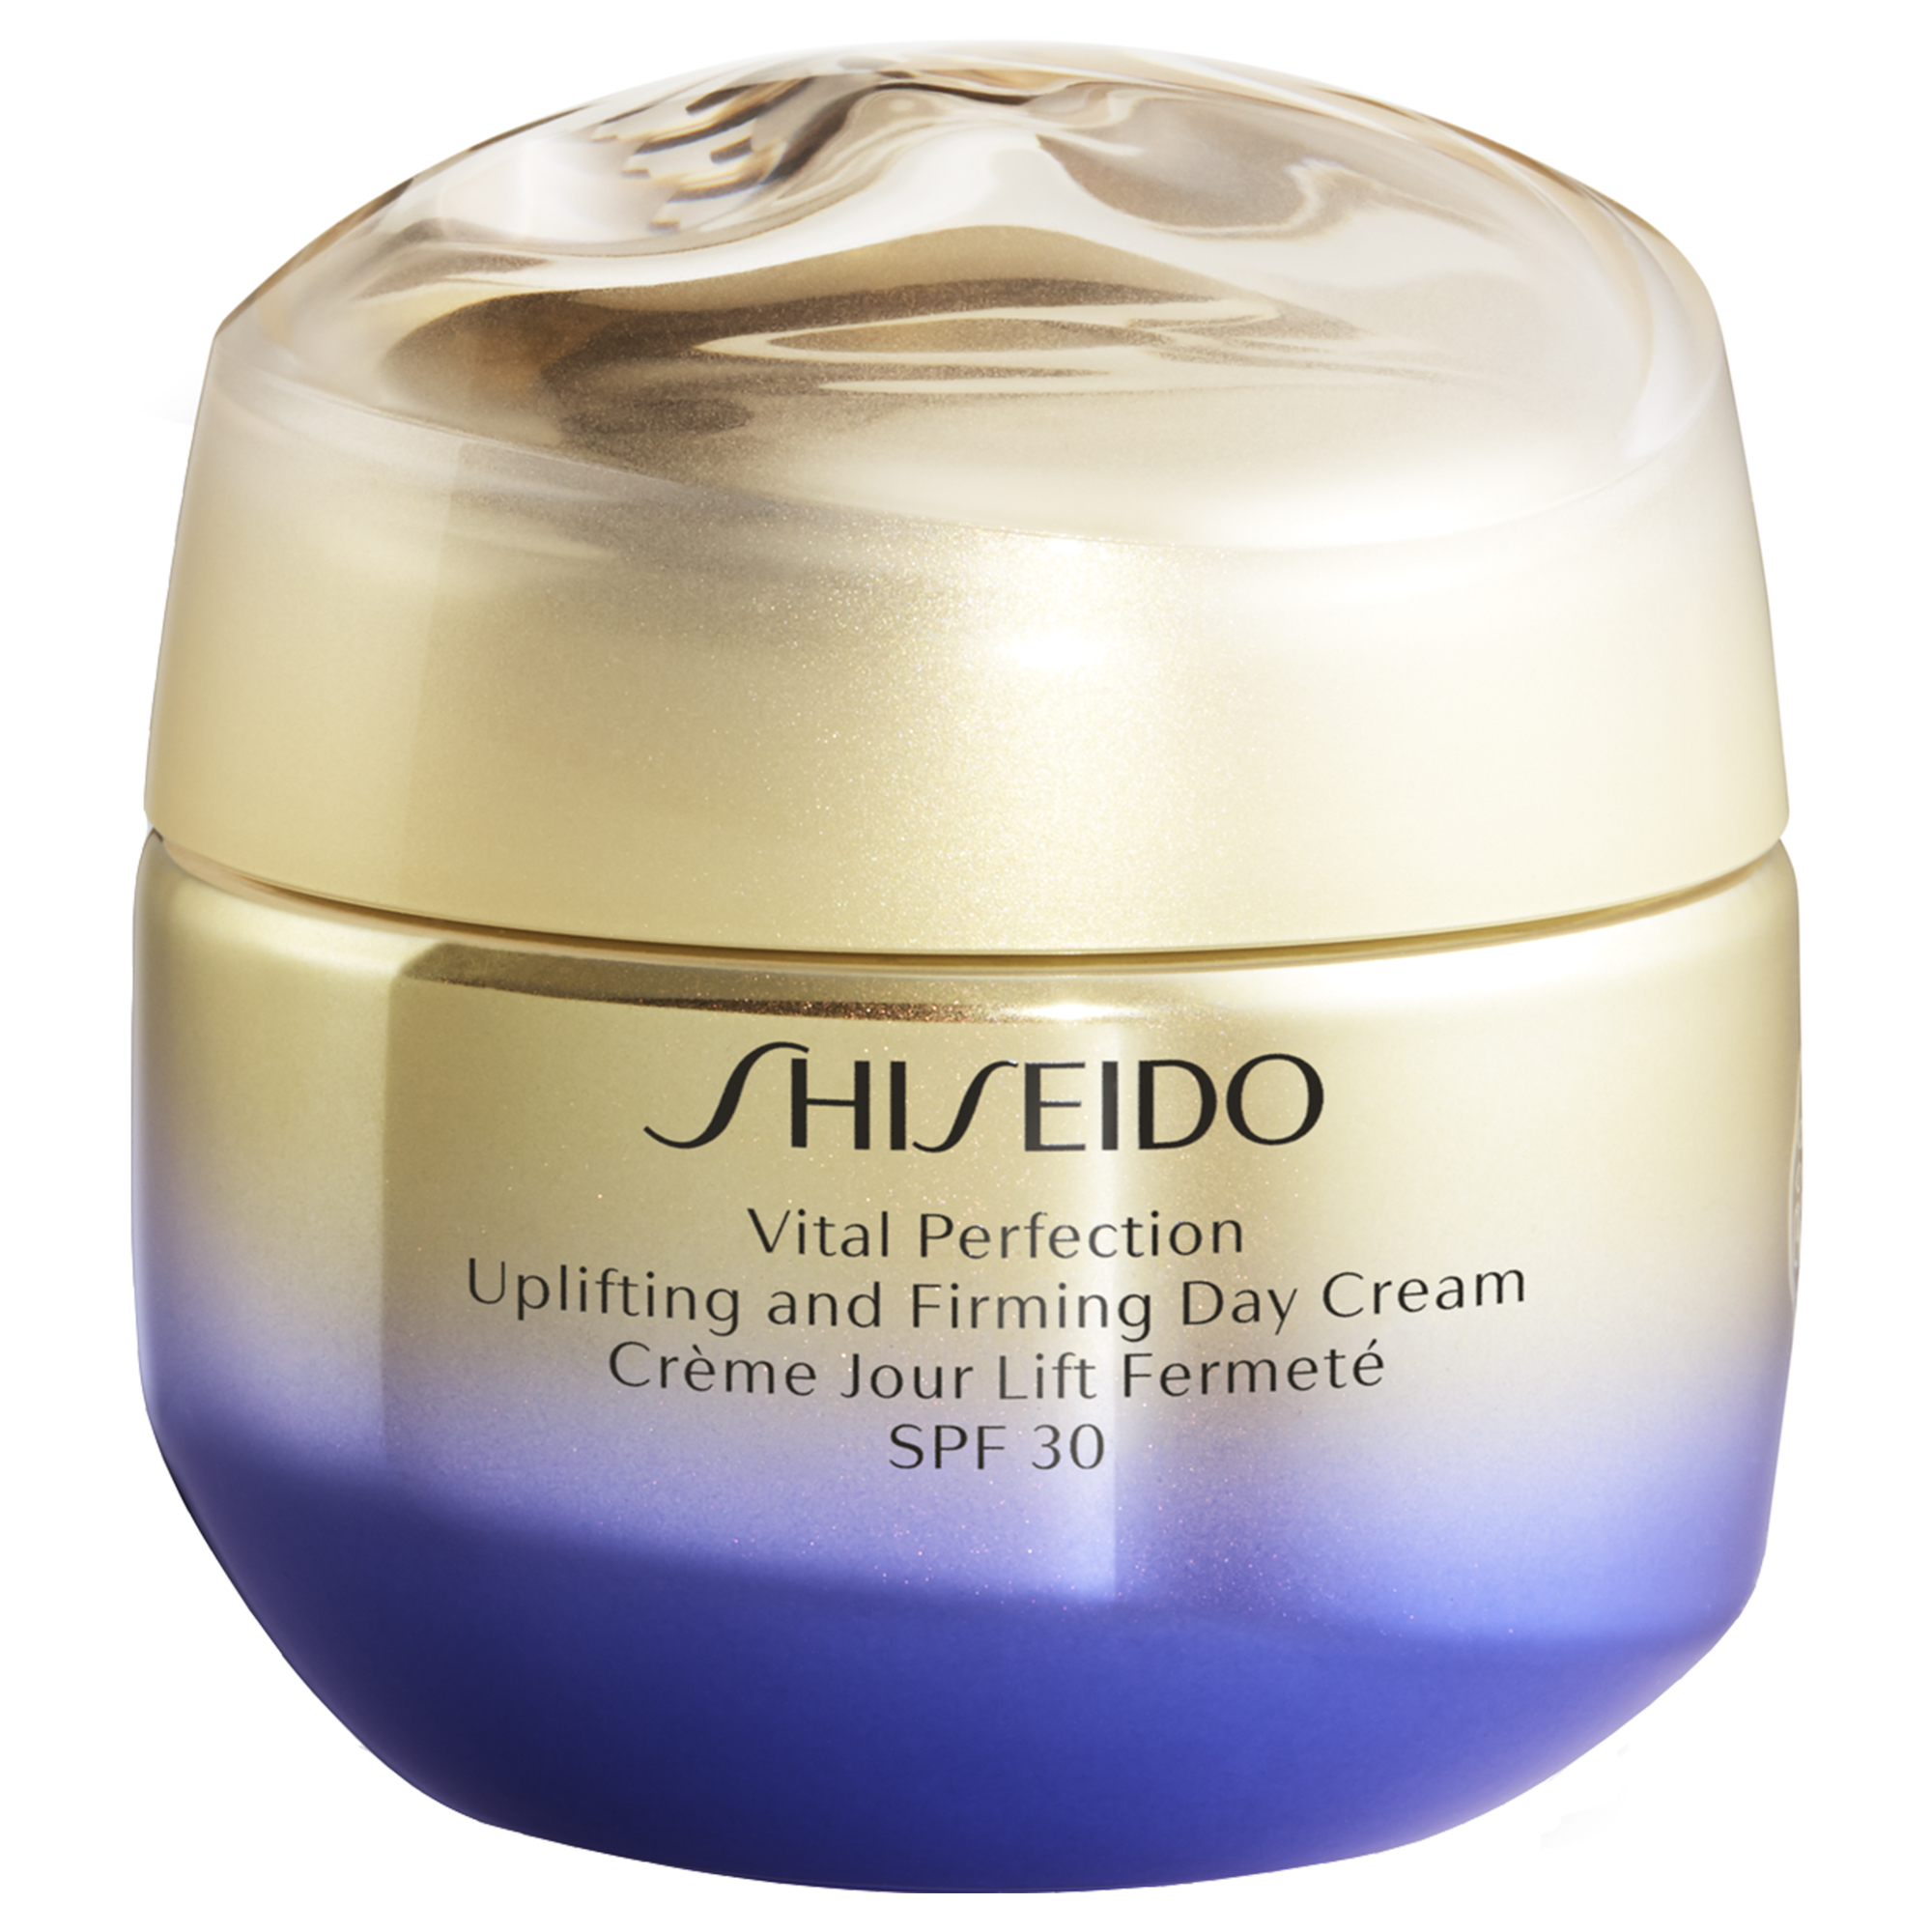 Shiseido Vital Perfection Uplifting and Firming Day Cream SPF 30 | Space NK